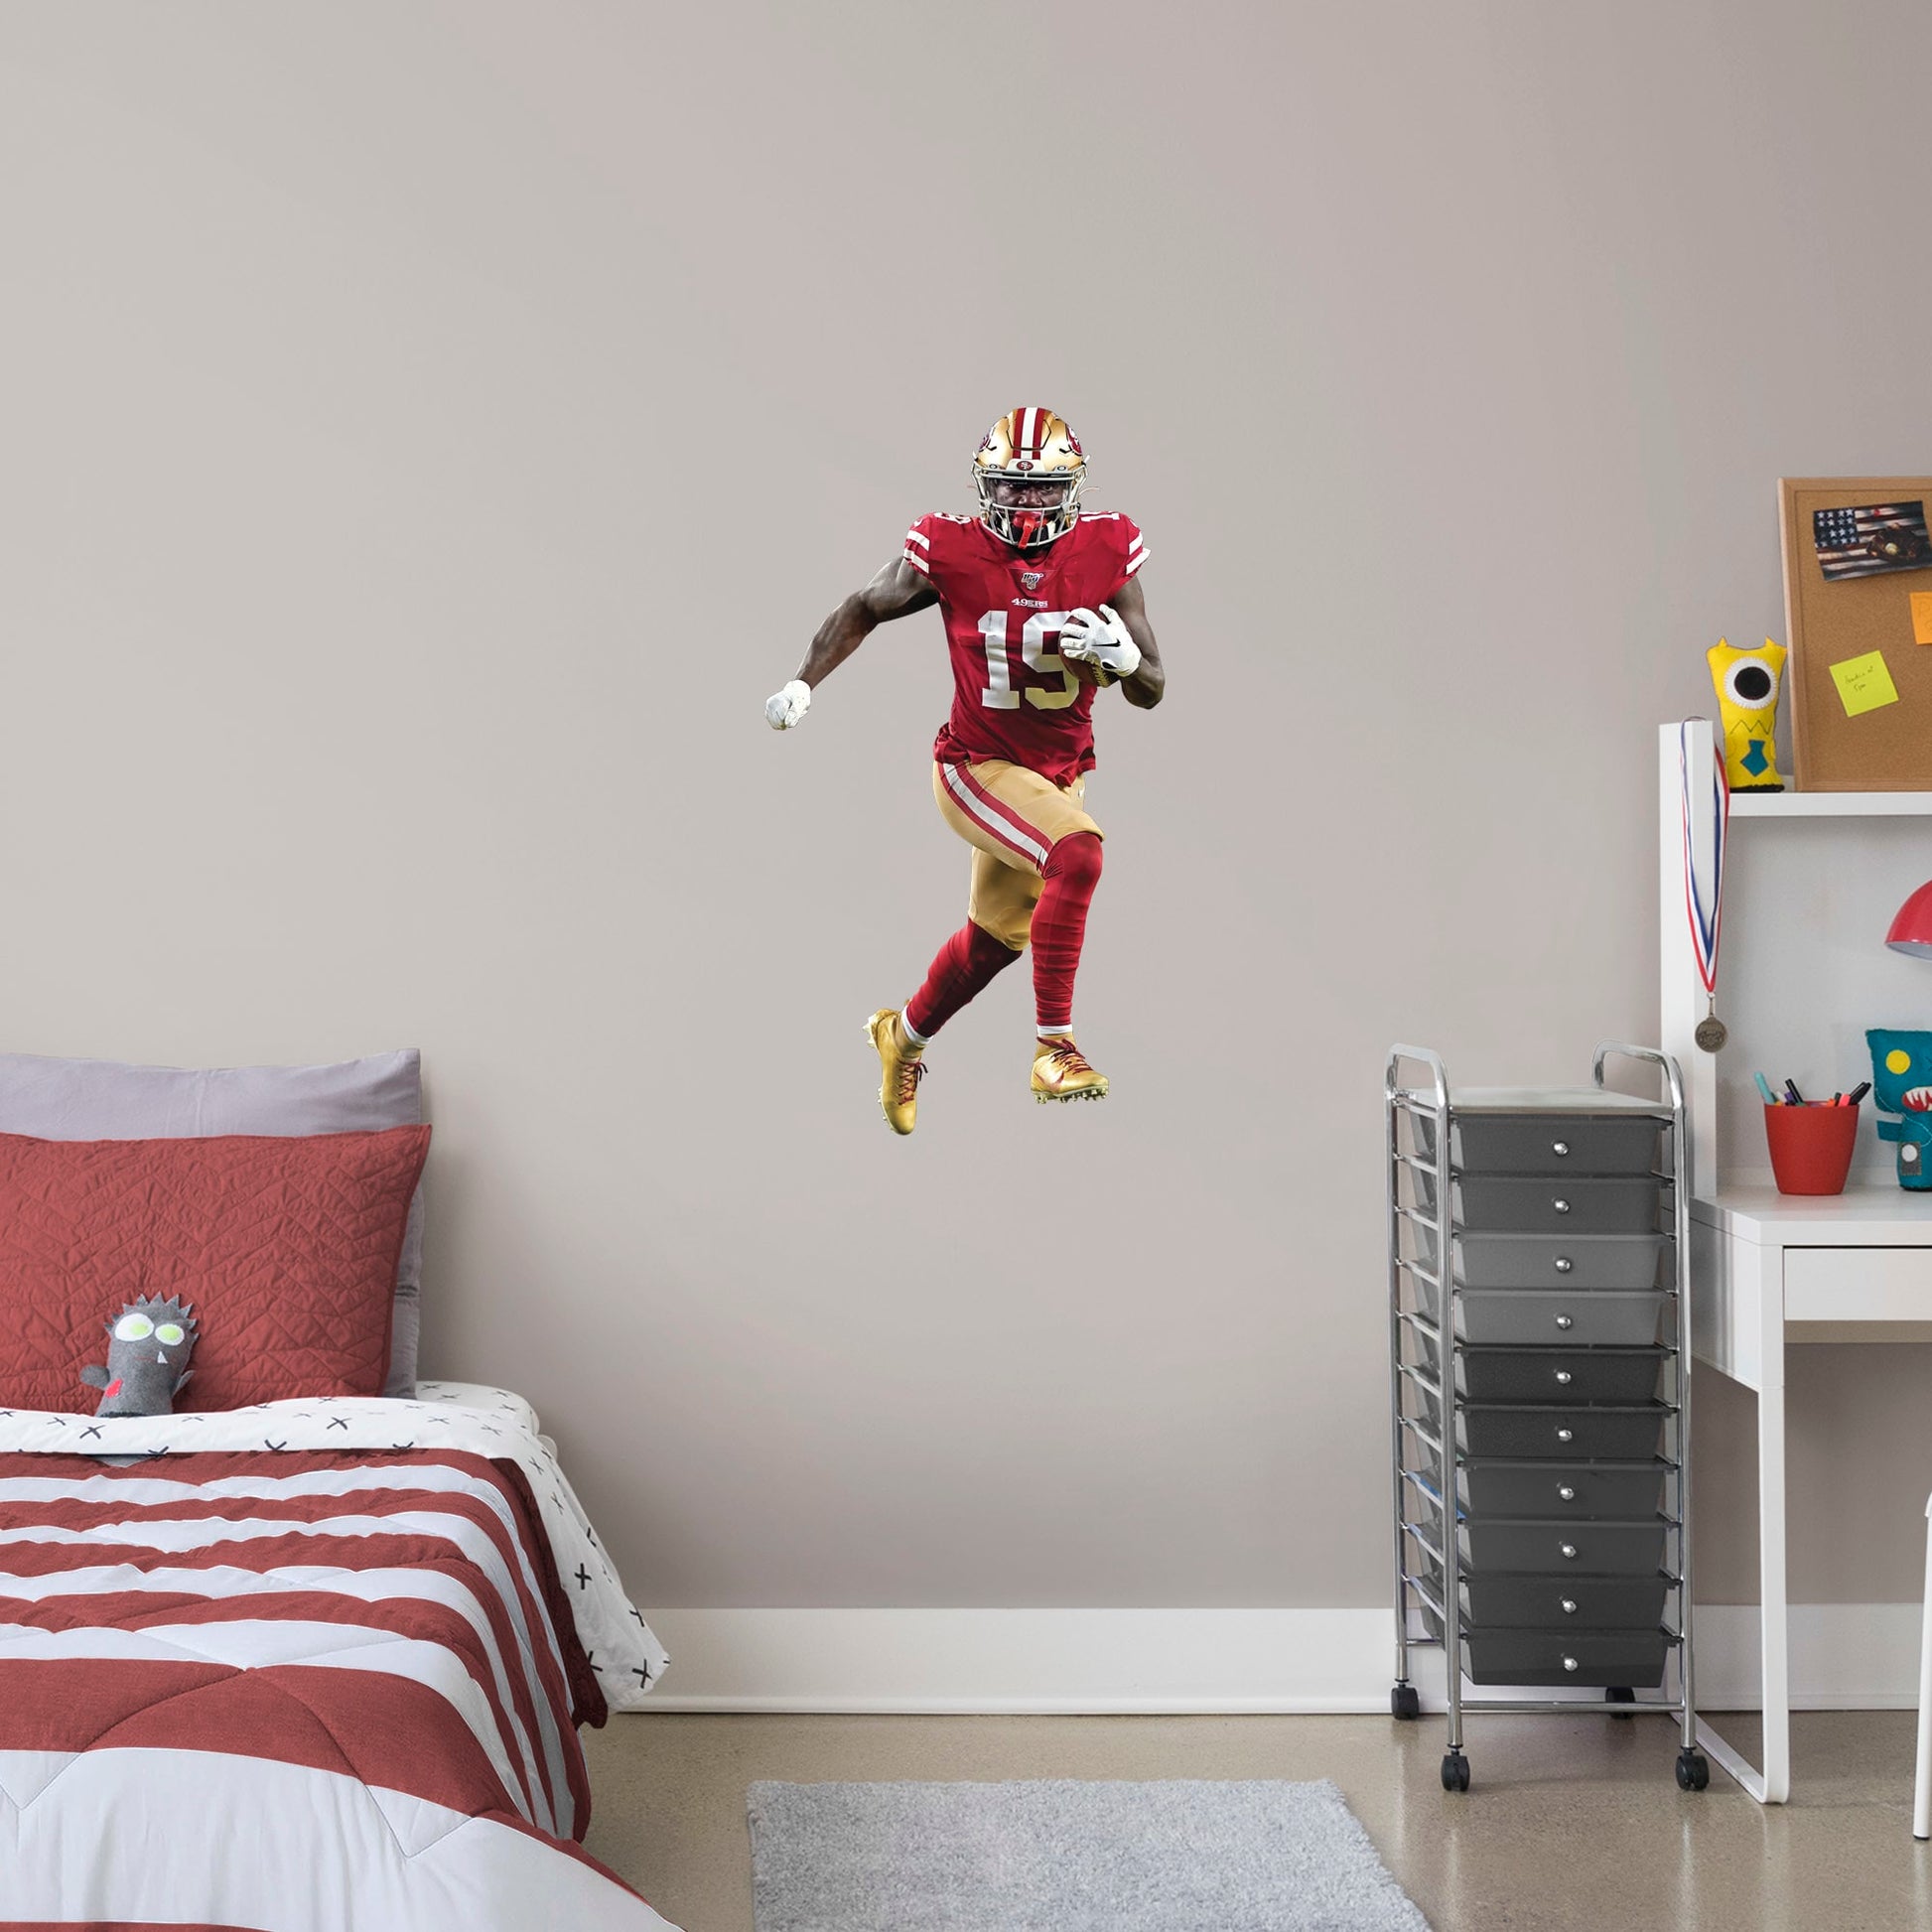 X-Large Athlete + 2 Decals (21"W x 39"H) Deebo Samuel is one of the most exciting players in the NFL and you can show your support with this high-quality removable wall decal! Place this durable vinyl decal on any wall and wide receiver Deebo can dominate your room, office, or man cave like he helps the San Francisco 49ers dominate the league! This decal can be easily applied and removed on almost any surface, so this speedster can follow you everywhere you go! Let's go, Niners!